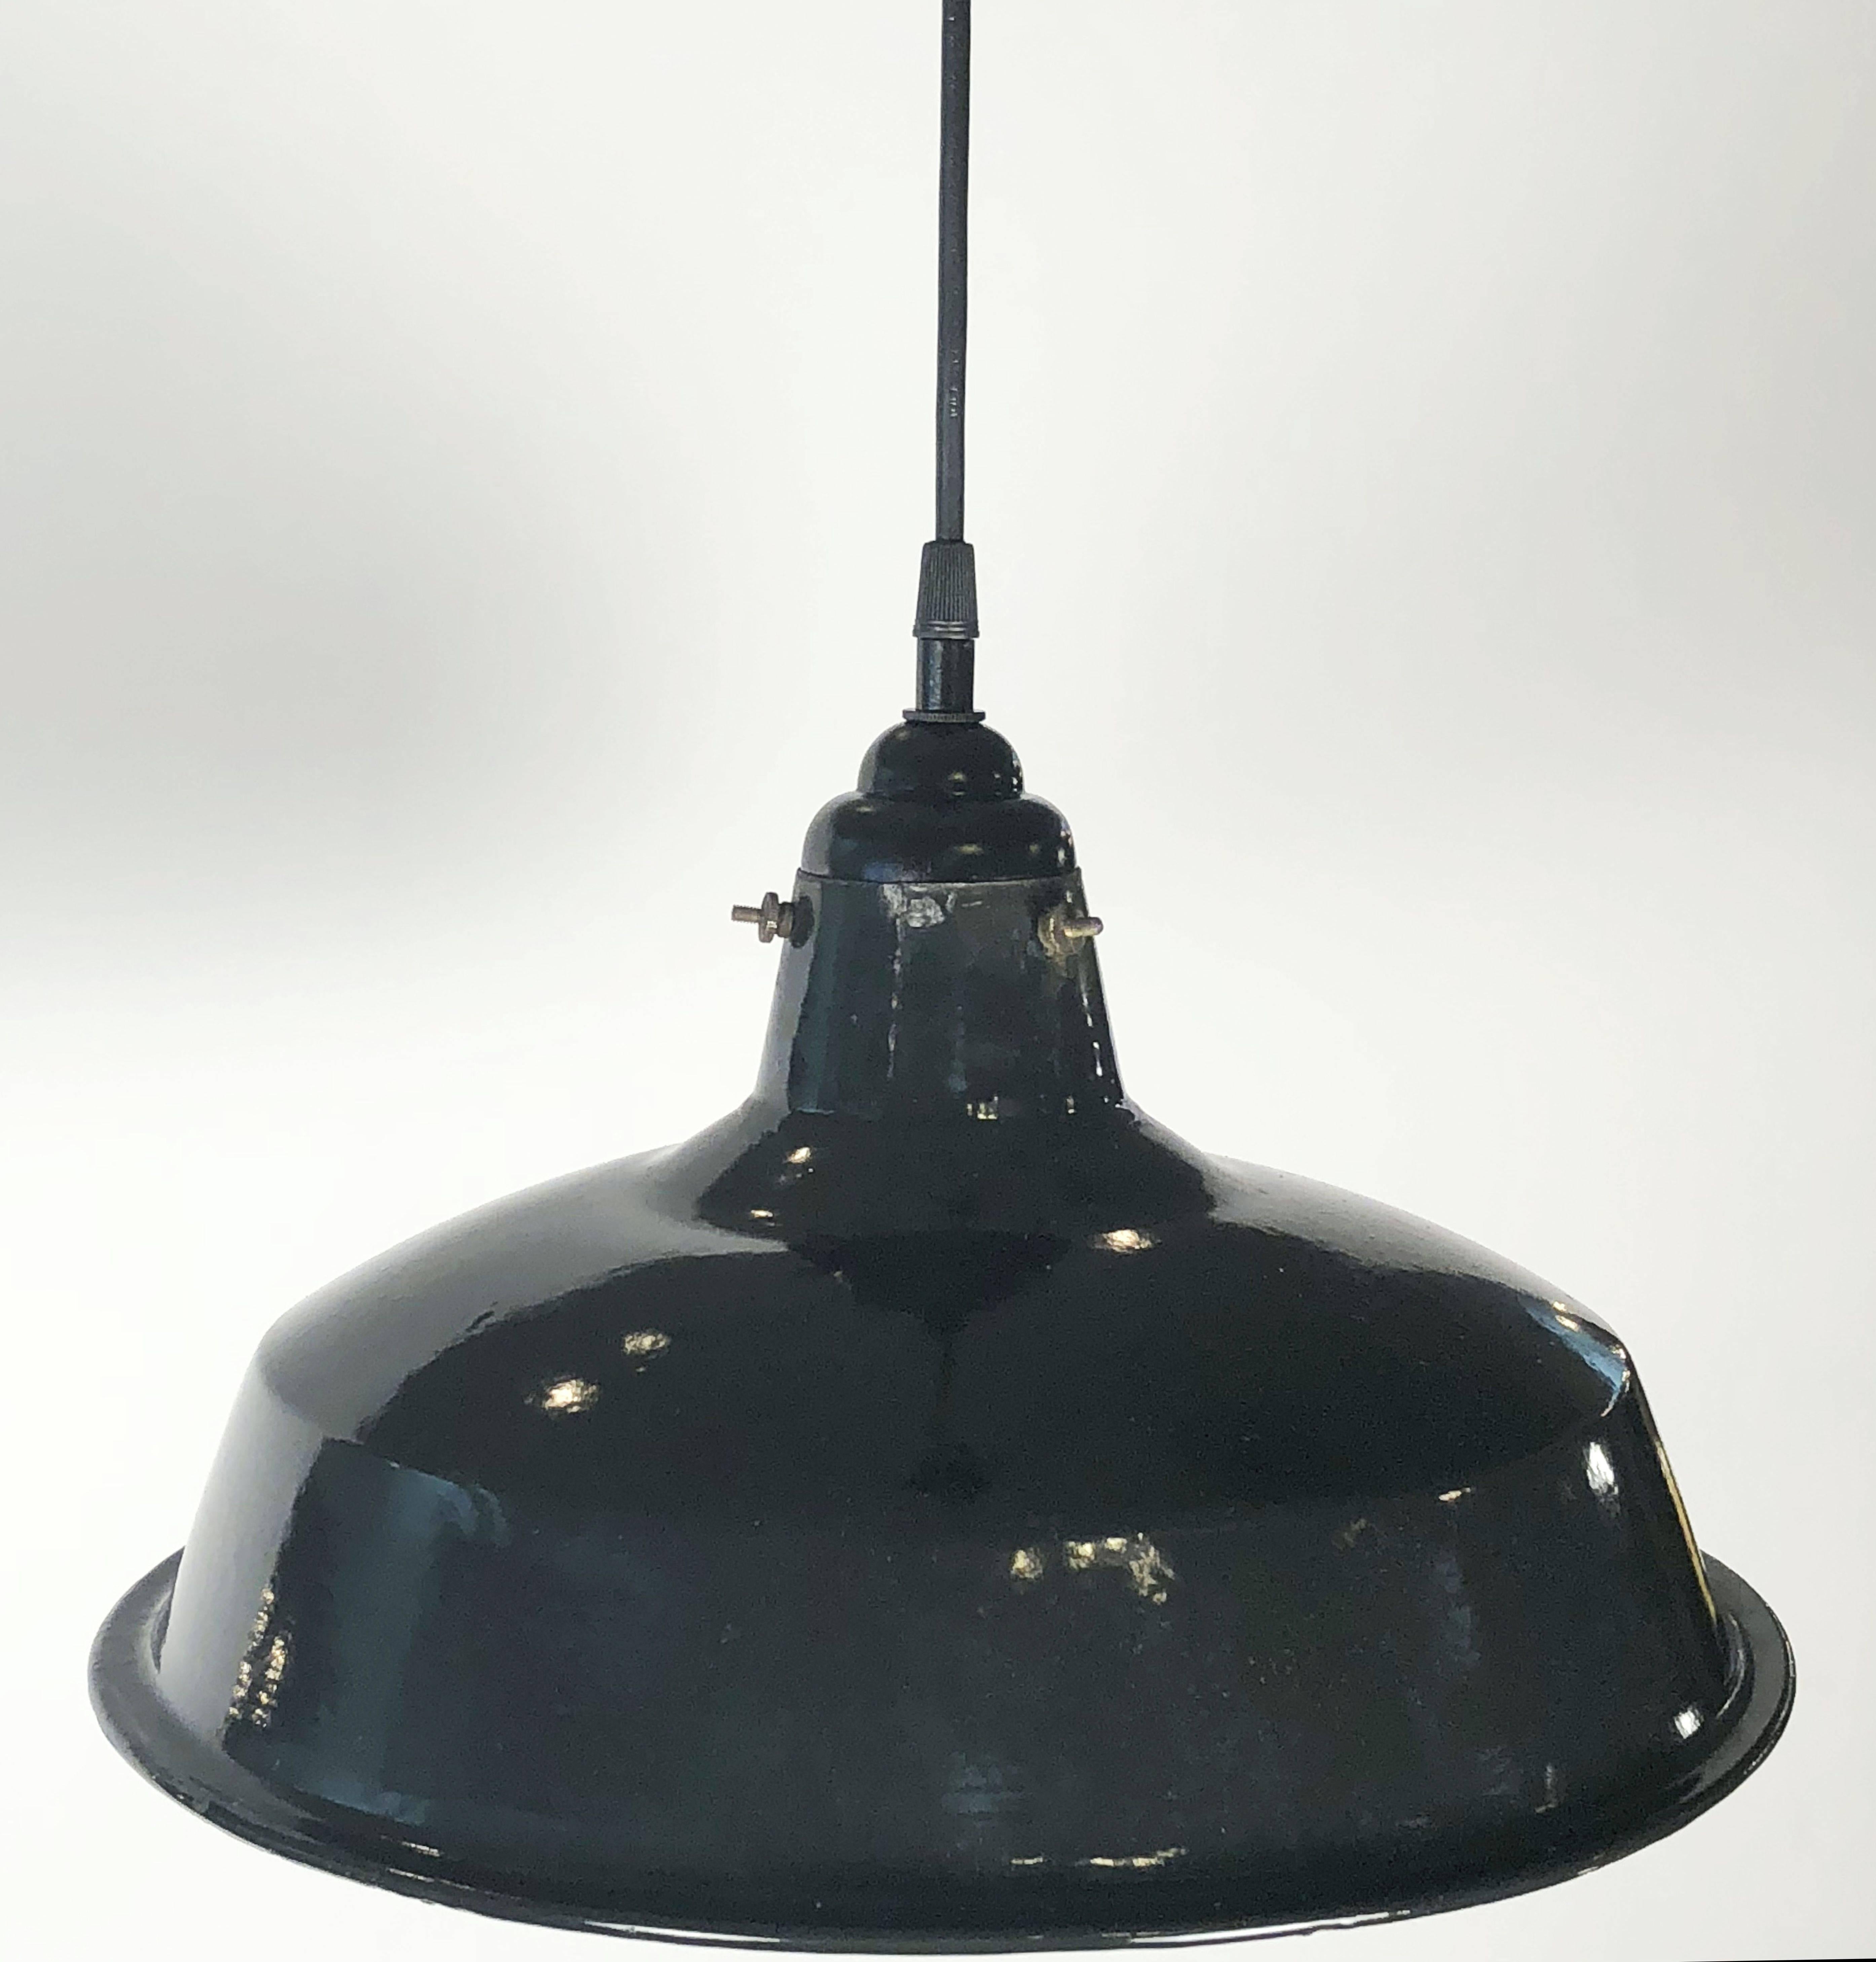 Metal Black Tole Industrial Hanging Lamps or Lanterns from England (14 1/4